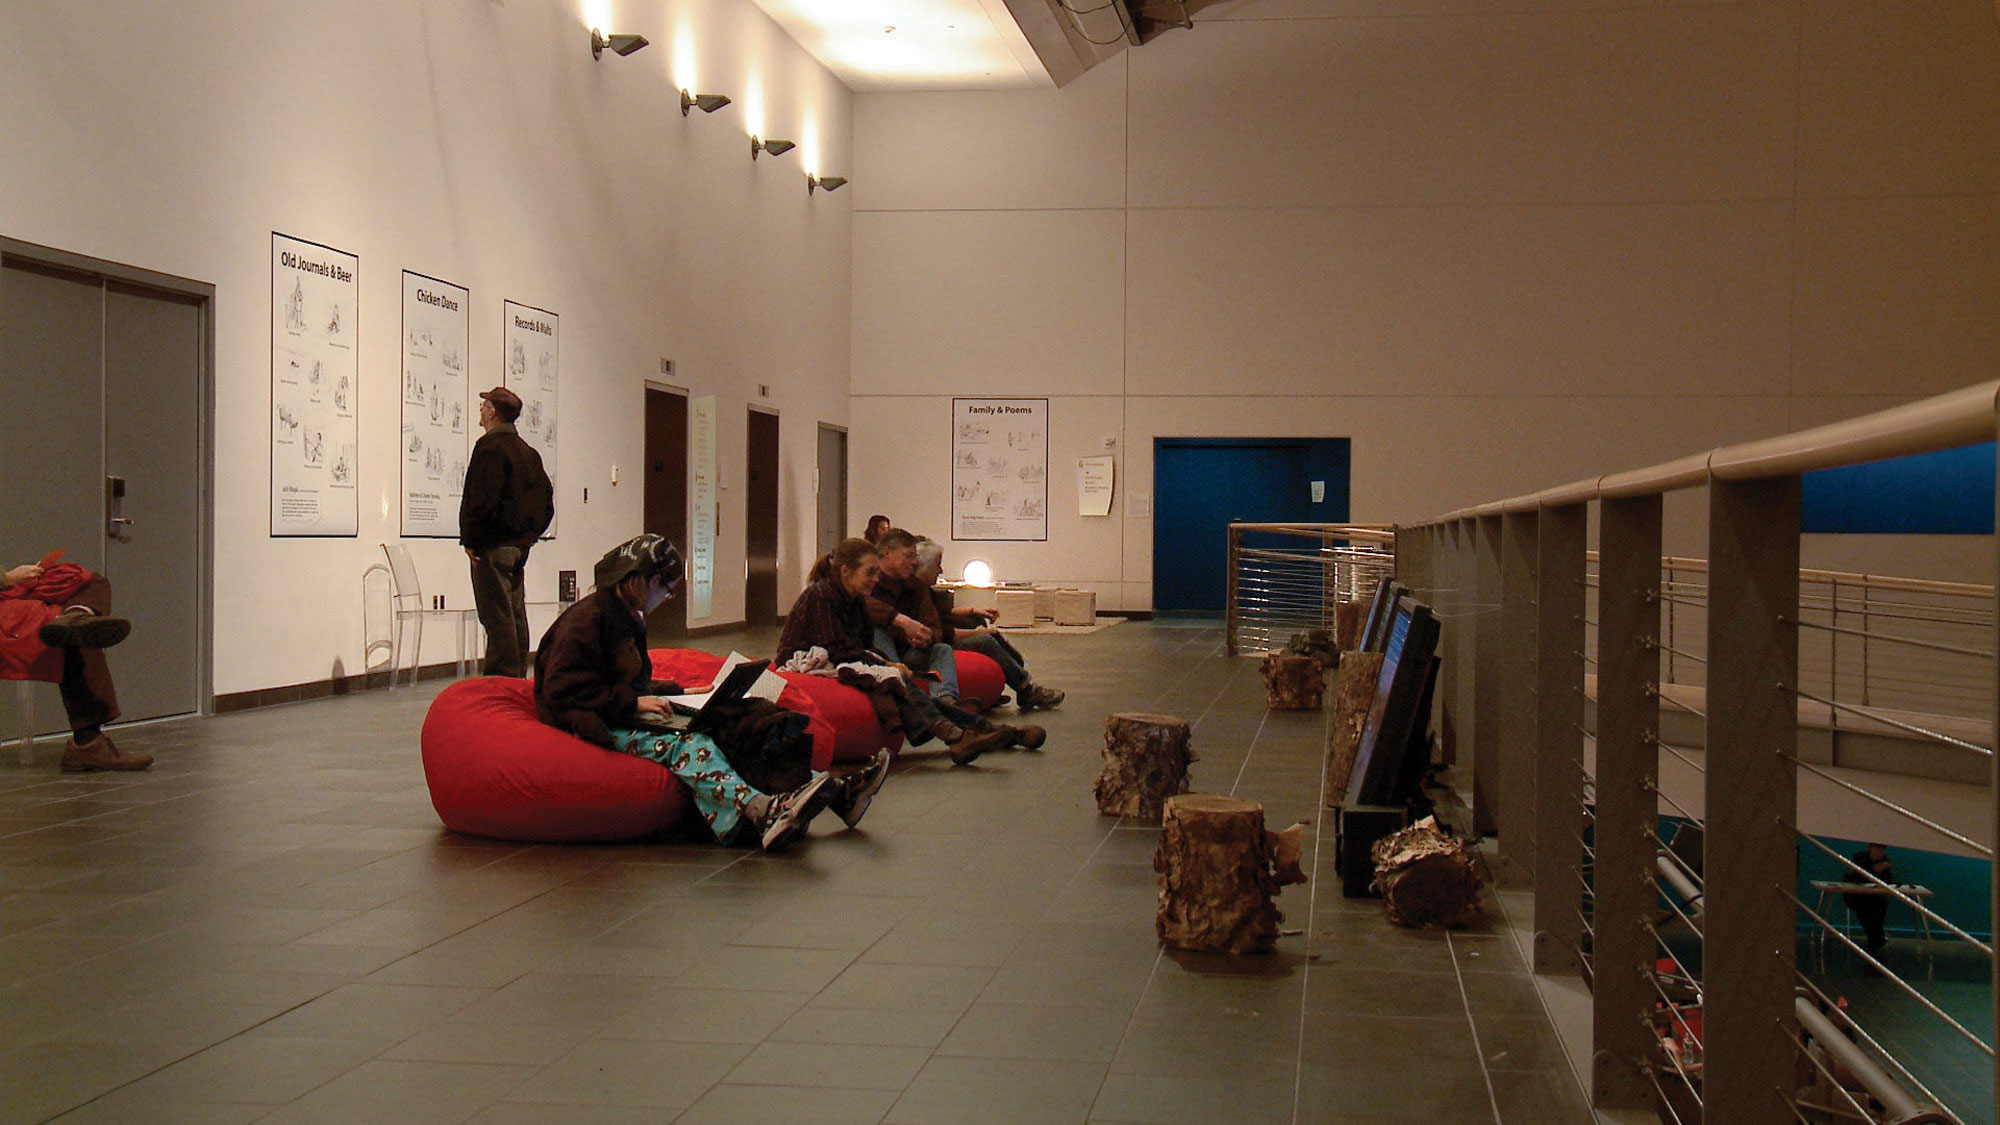 A group of about five people seated in red bean bag chairs on the floor of a hallway as other people mill about looking at posters hung on the walls. 